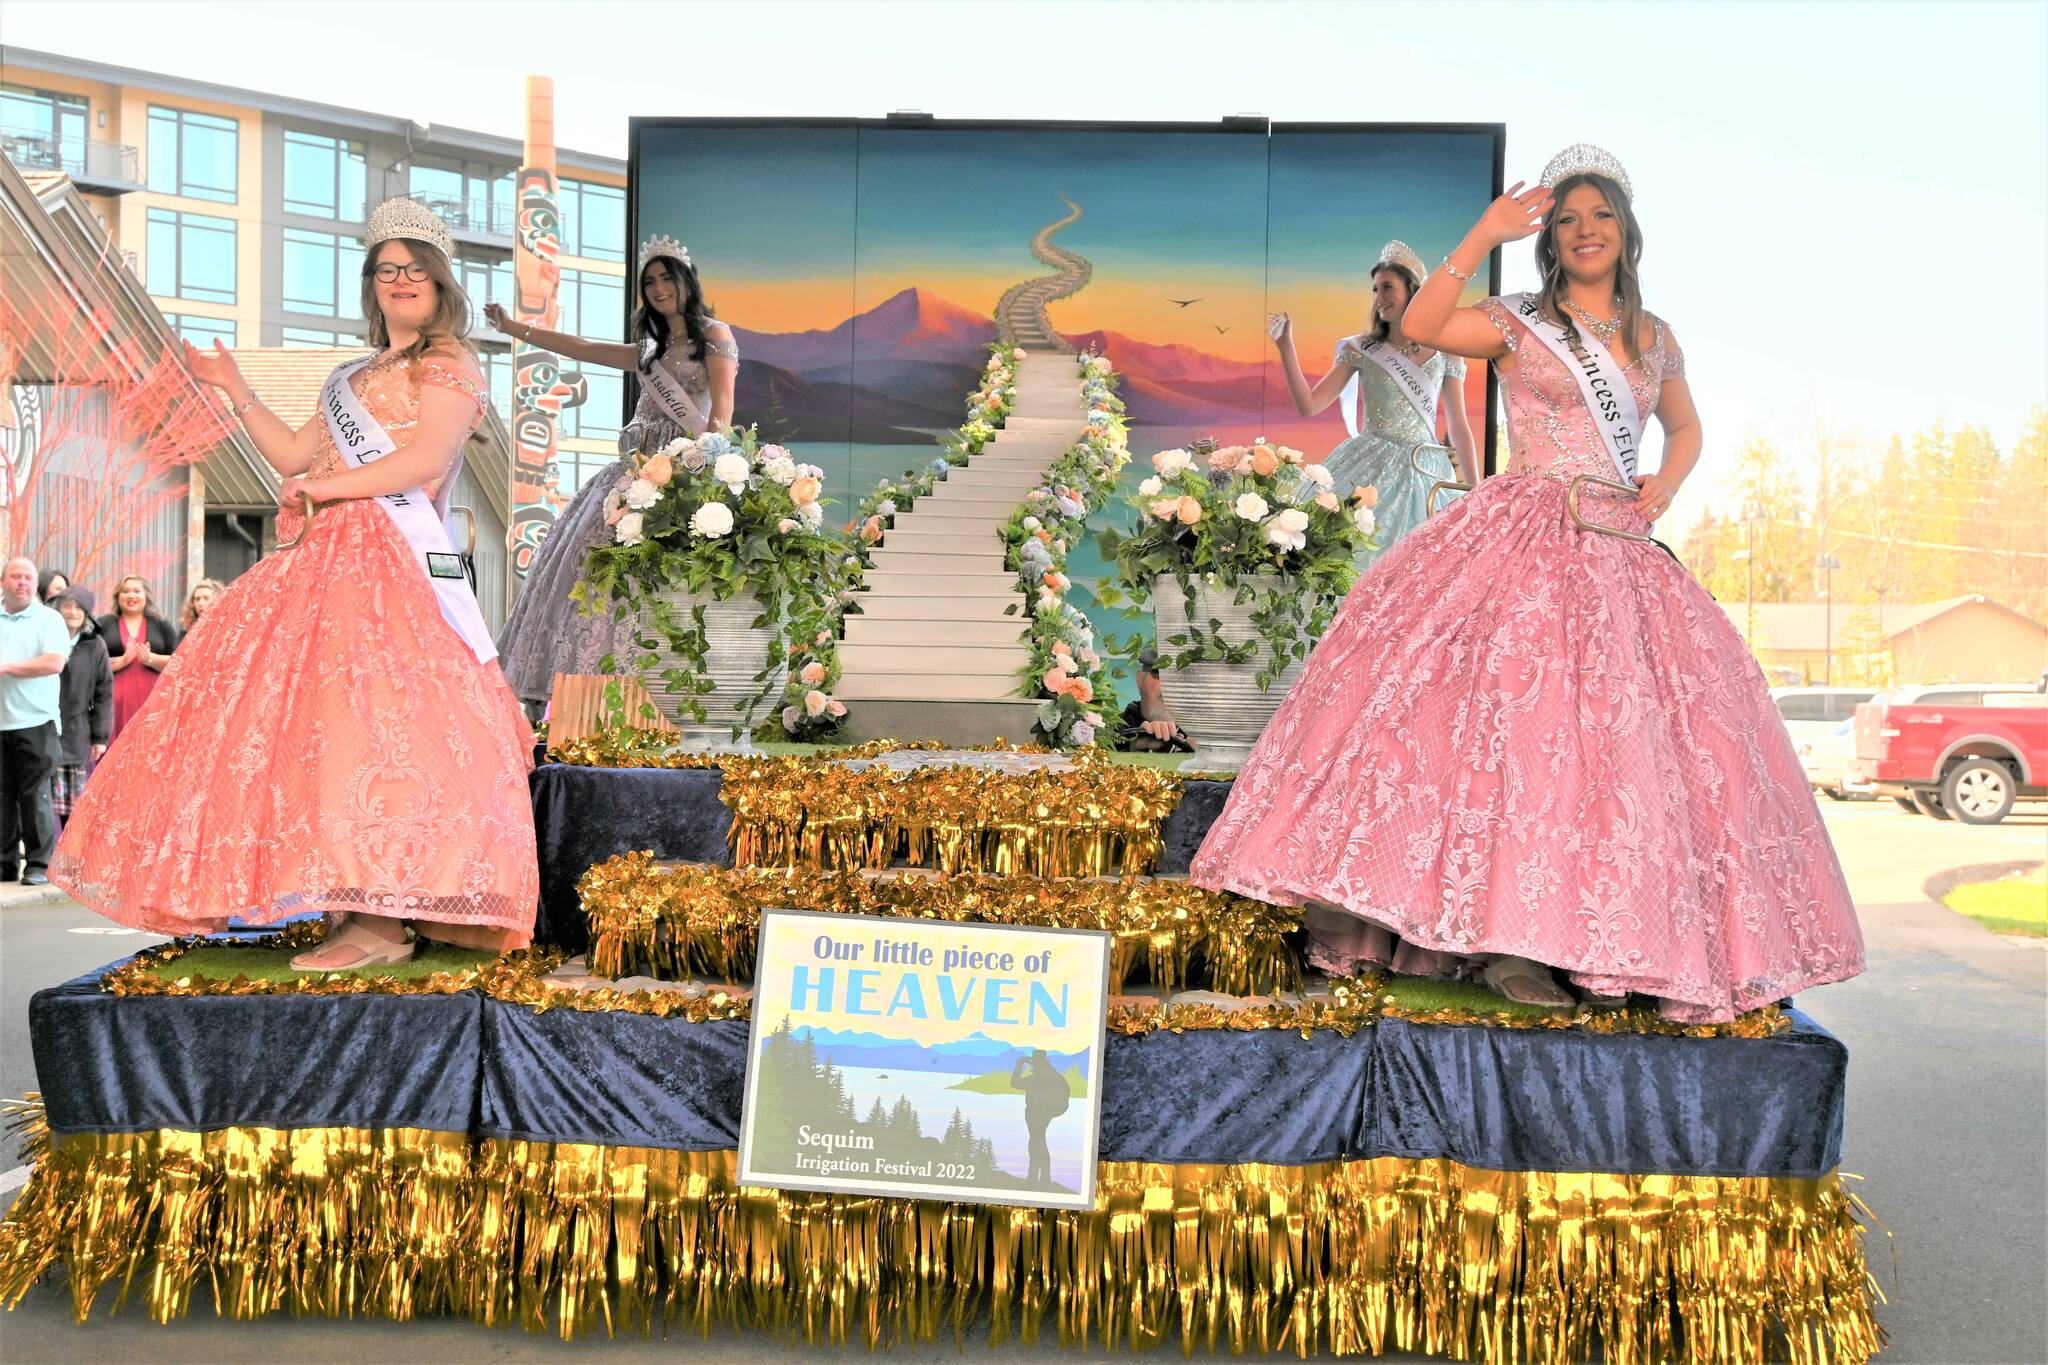 The 2022 Sequim Irrigation Festival royalty court boards the festival float at the 7 Cedars Resort on Saturday. From left are princesses Lauren Willis and Ellie Turner, queen Isabella Williams and Katherine Gould. (Michael Dashiell/Olympic Peninsula News Group)